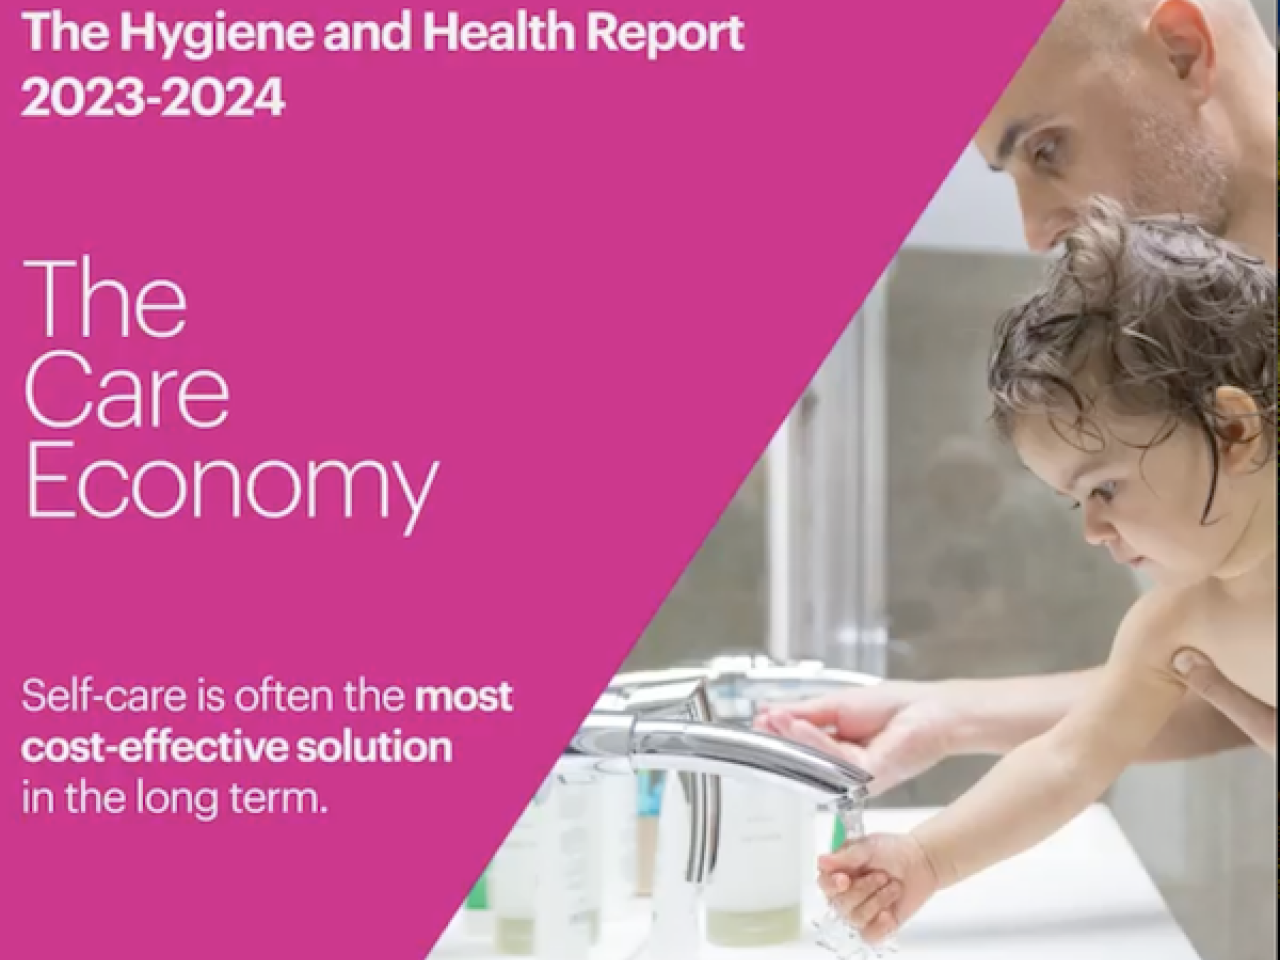 The Hygiene and Health Report: The Care Economy.